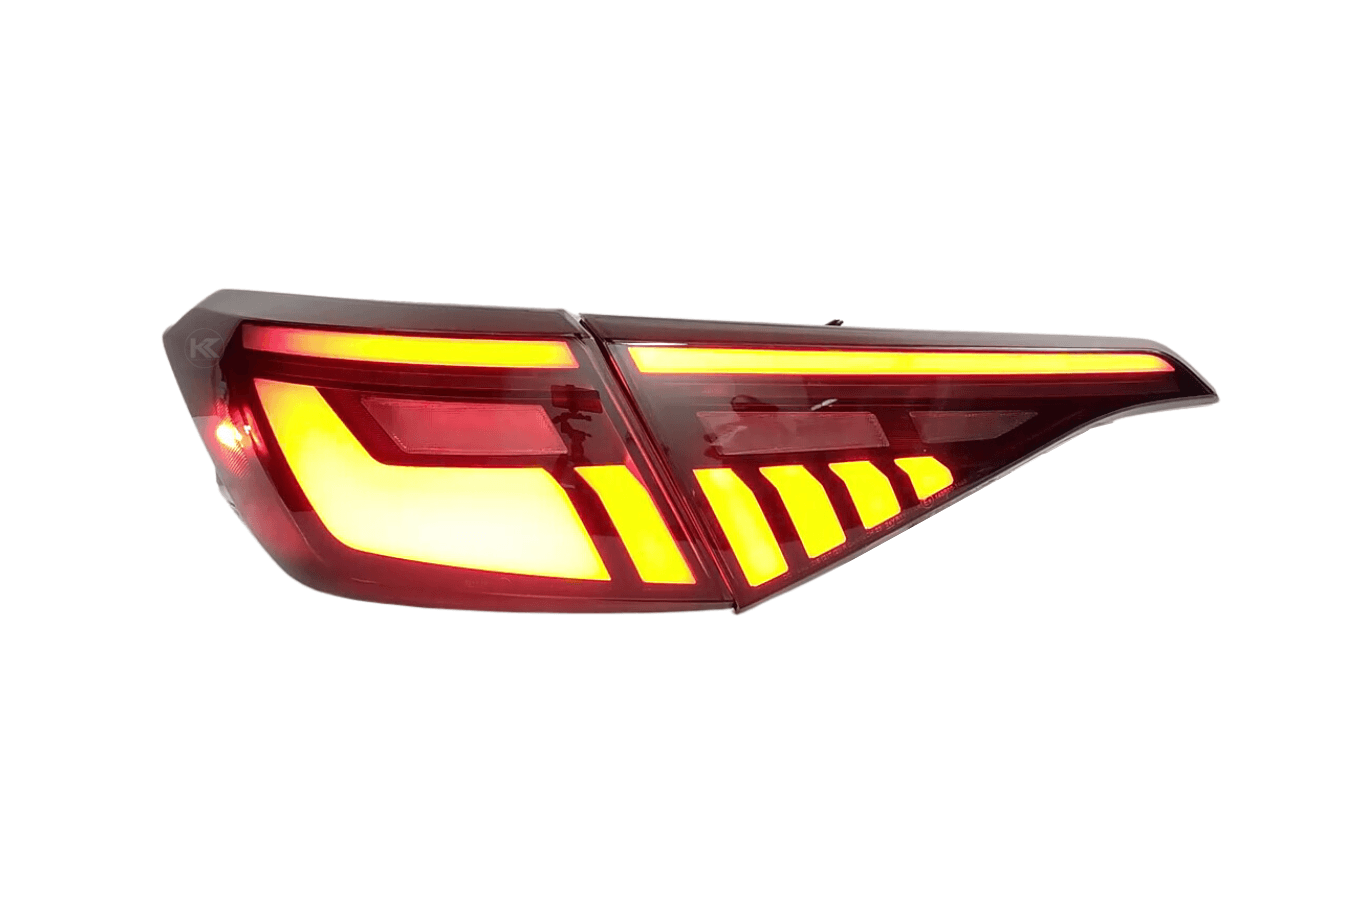 Honda Civic 11th Gen RGB LED Tail Lights with Animation 2021-2023 - K2 Industries